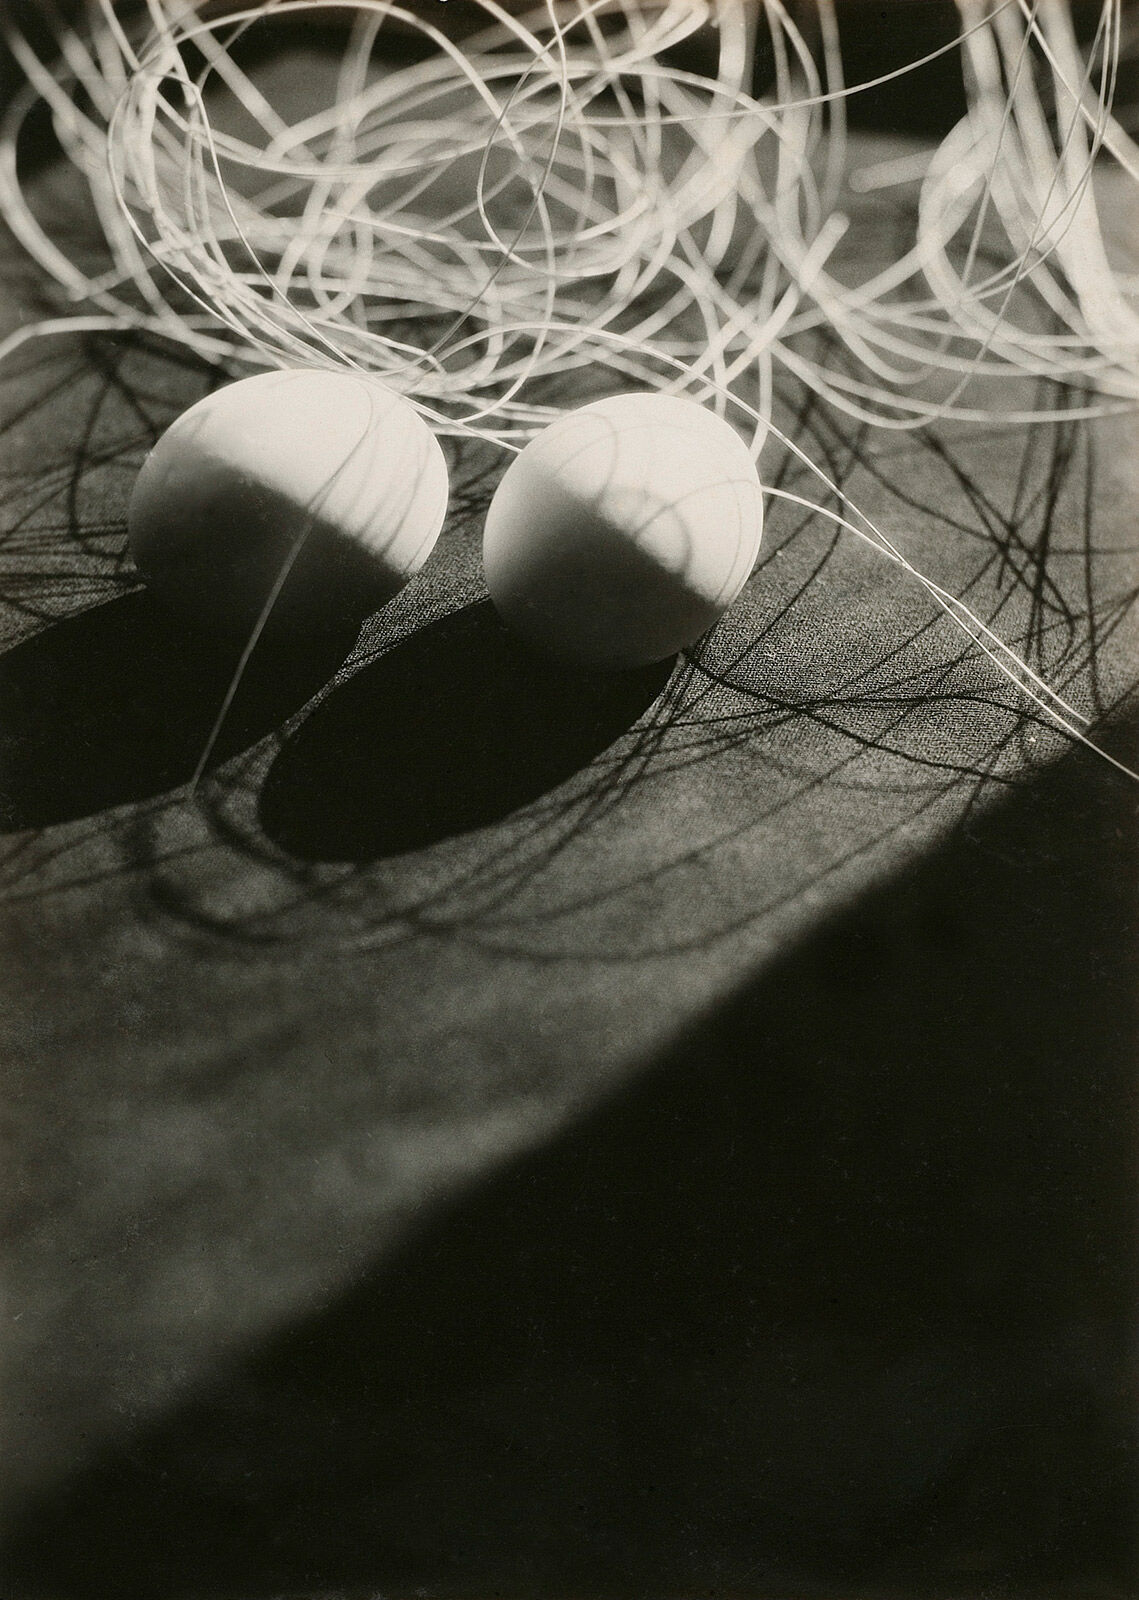 Yamawaki Iwao, Untitled (Composition with eggs and string, Bauhaus)